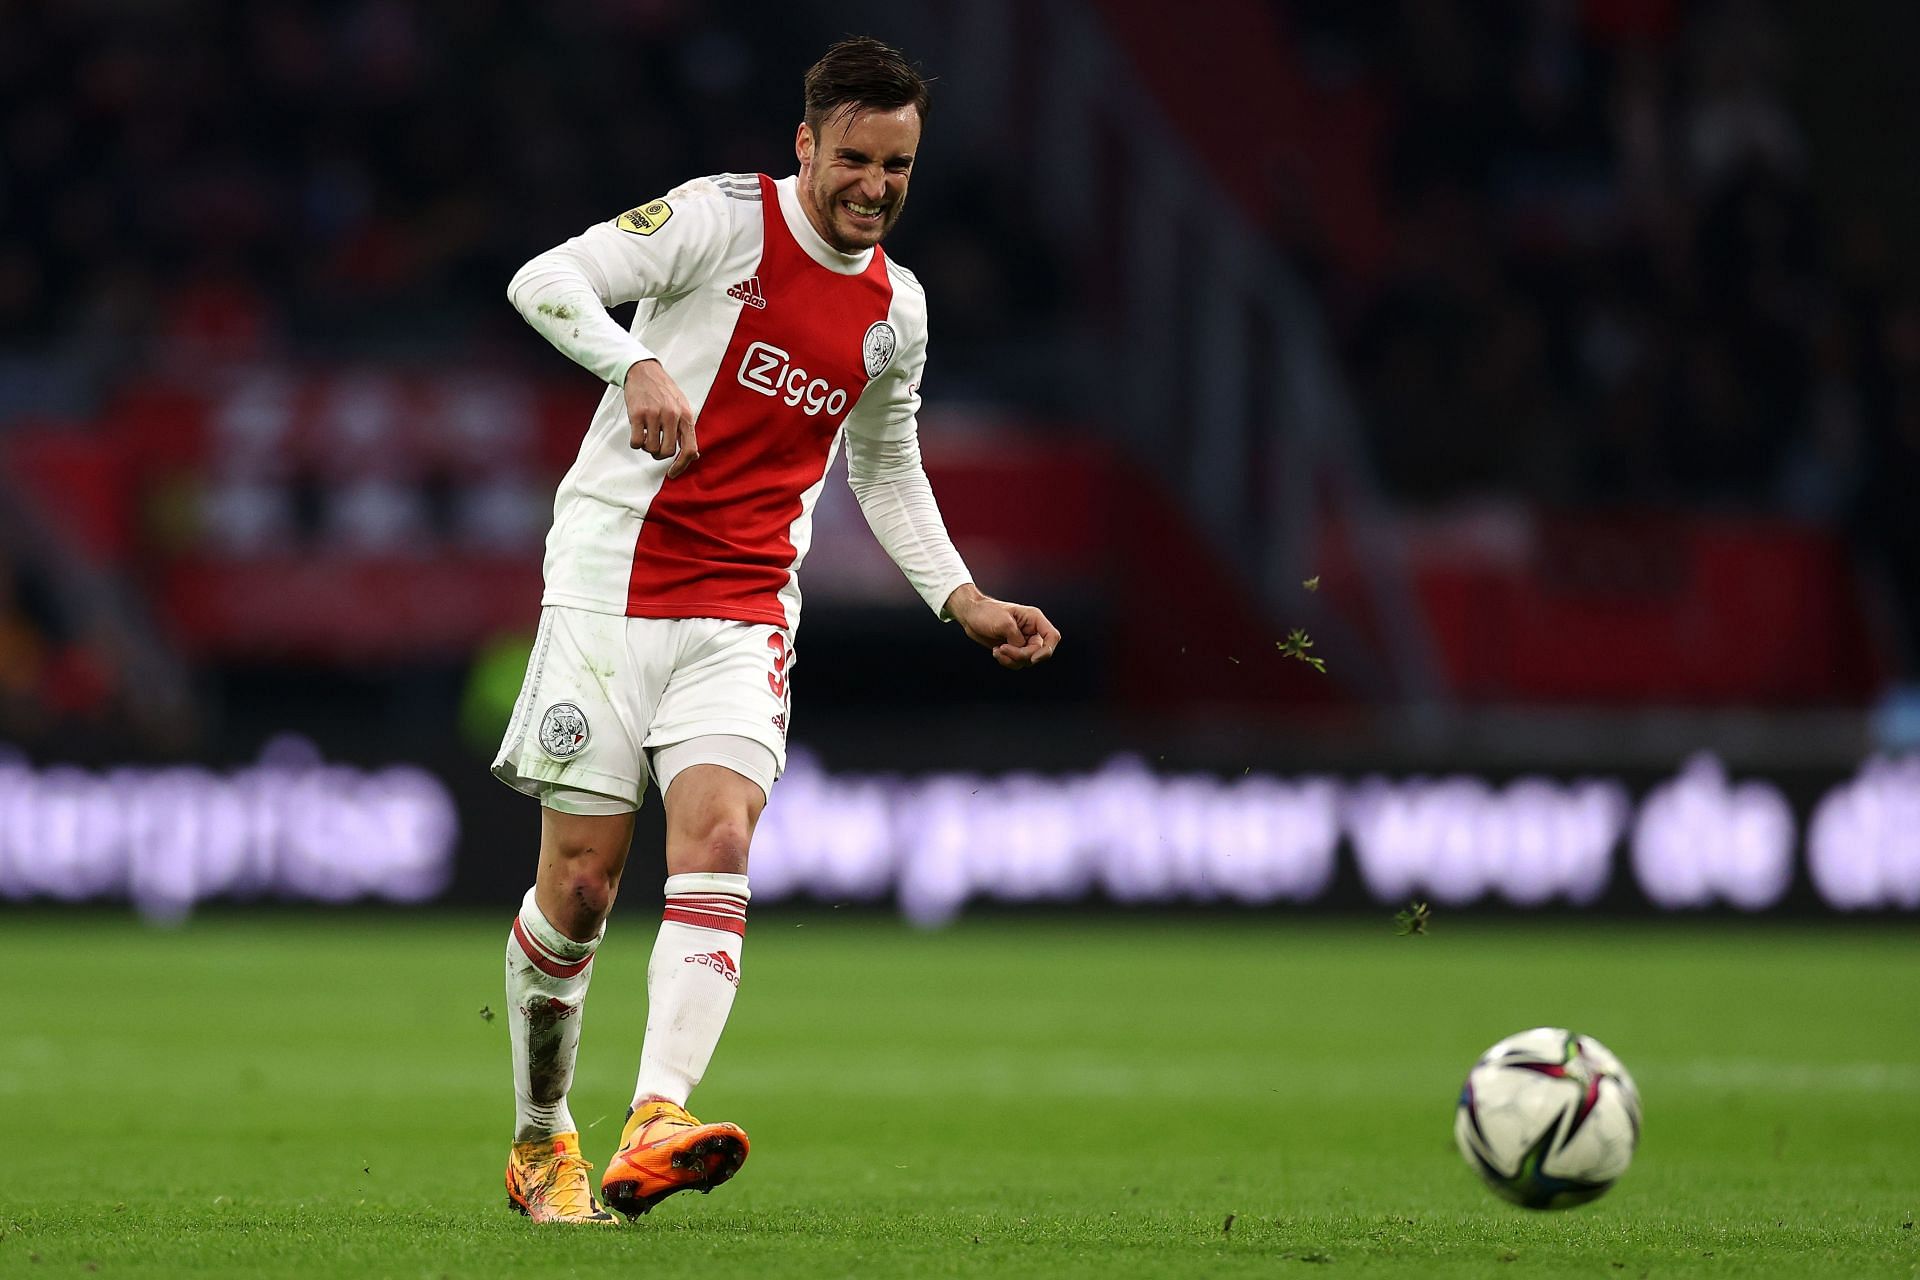 Tagliafico has one year left on his contract with Ajax